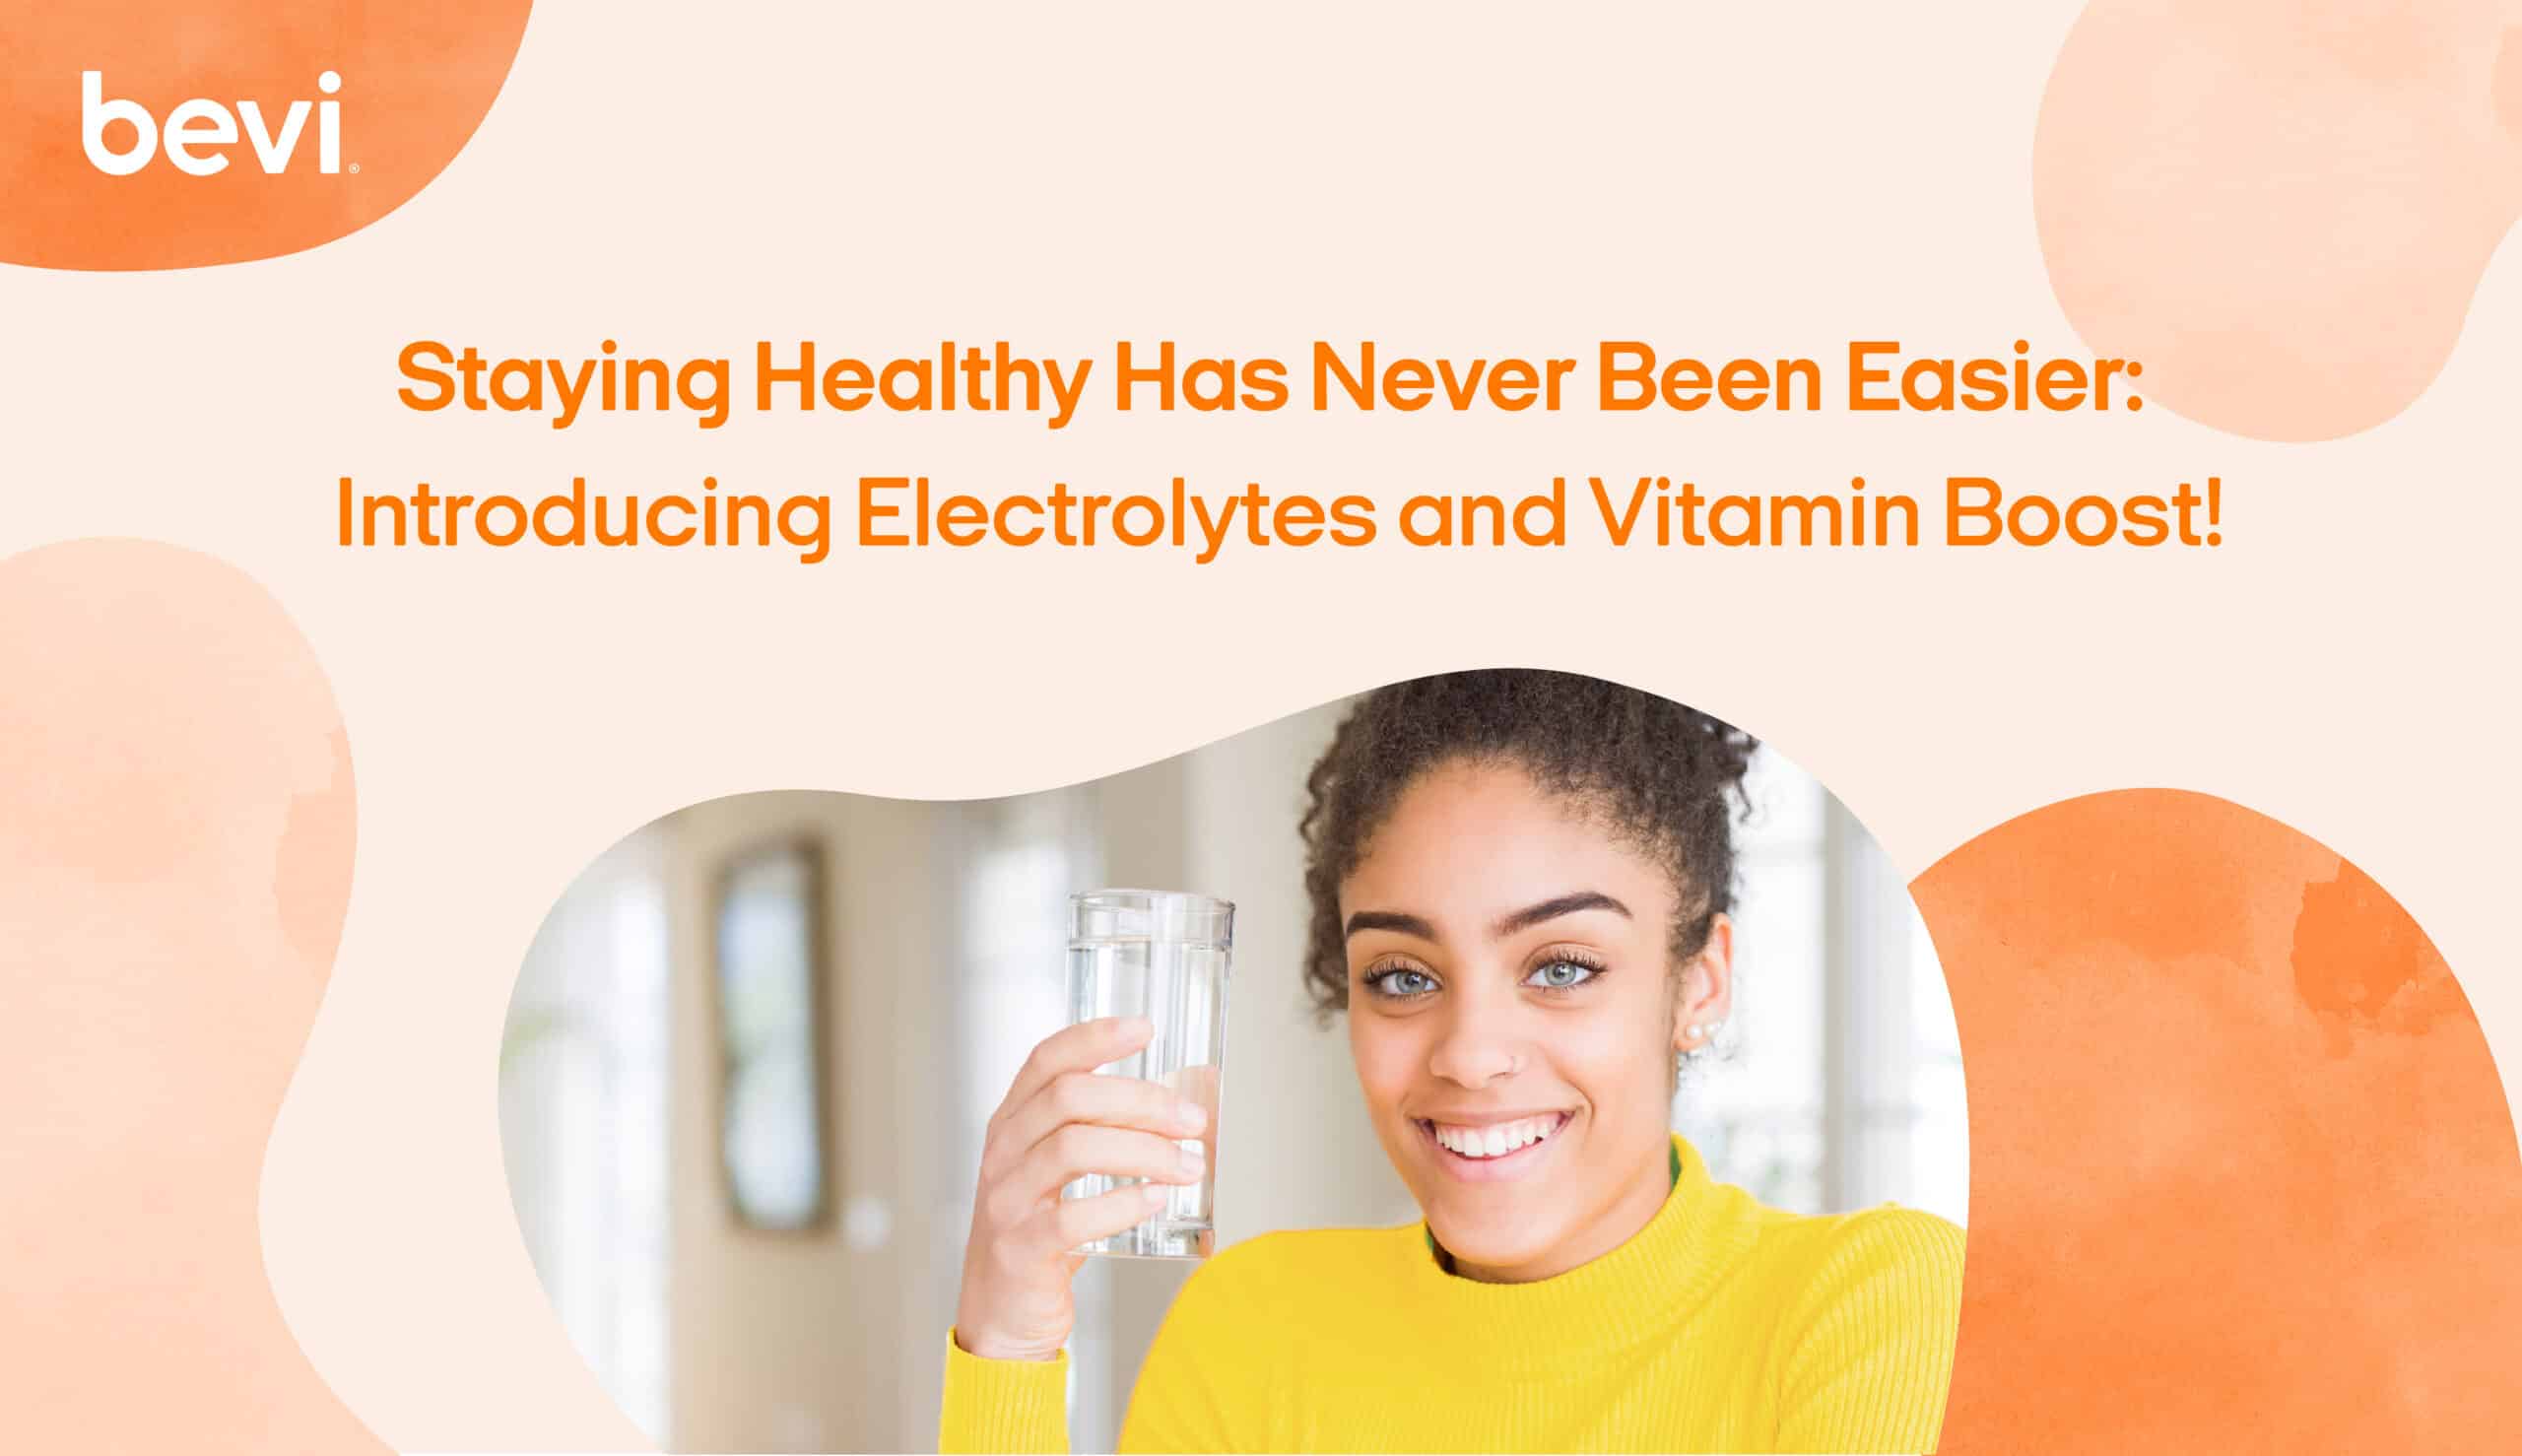 Staying Healthy Has Never Been Easier: Introducing Electrolytes and Vitamin Boost